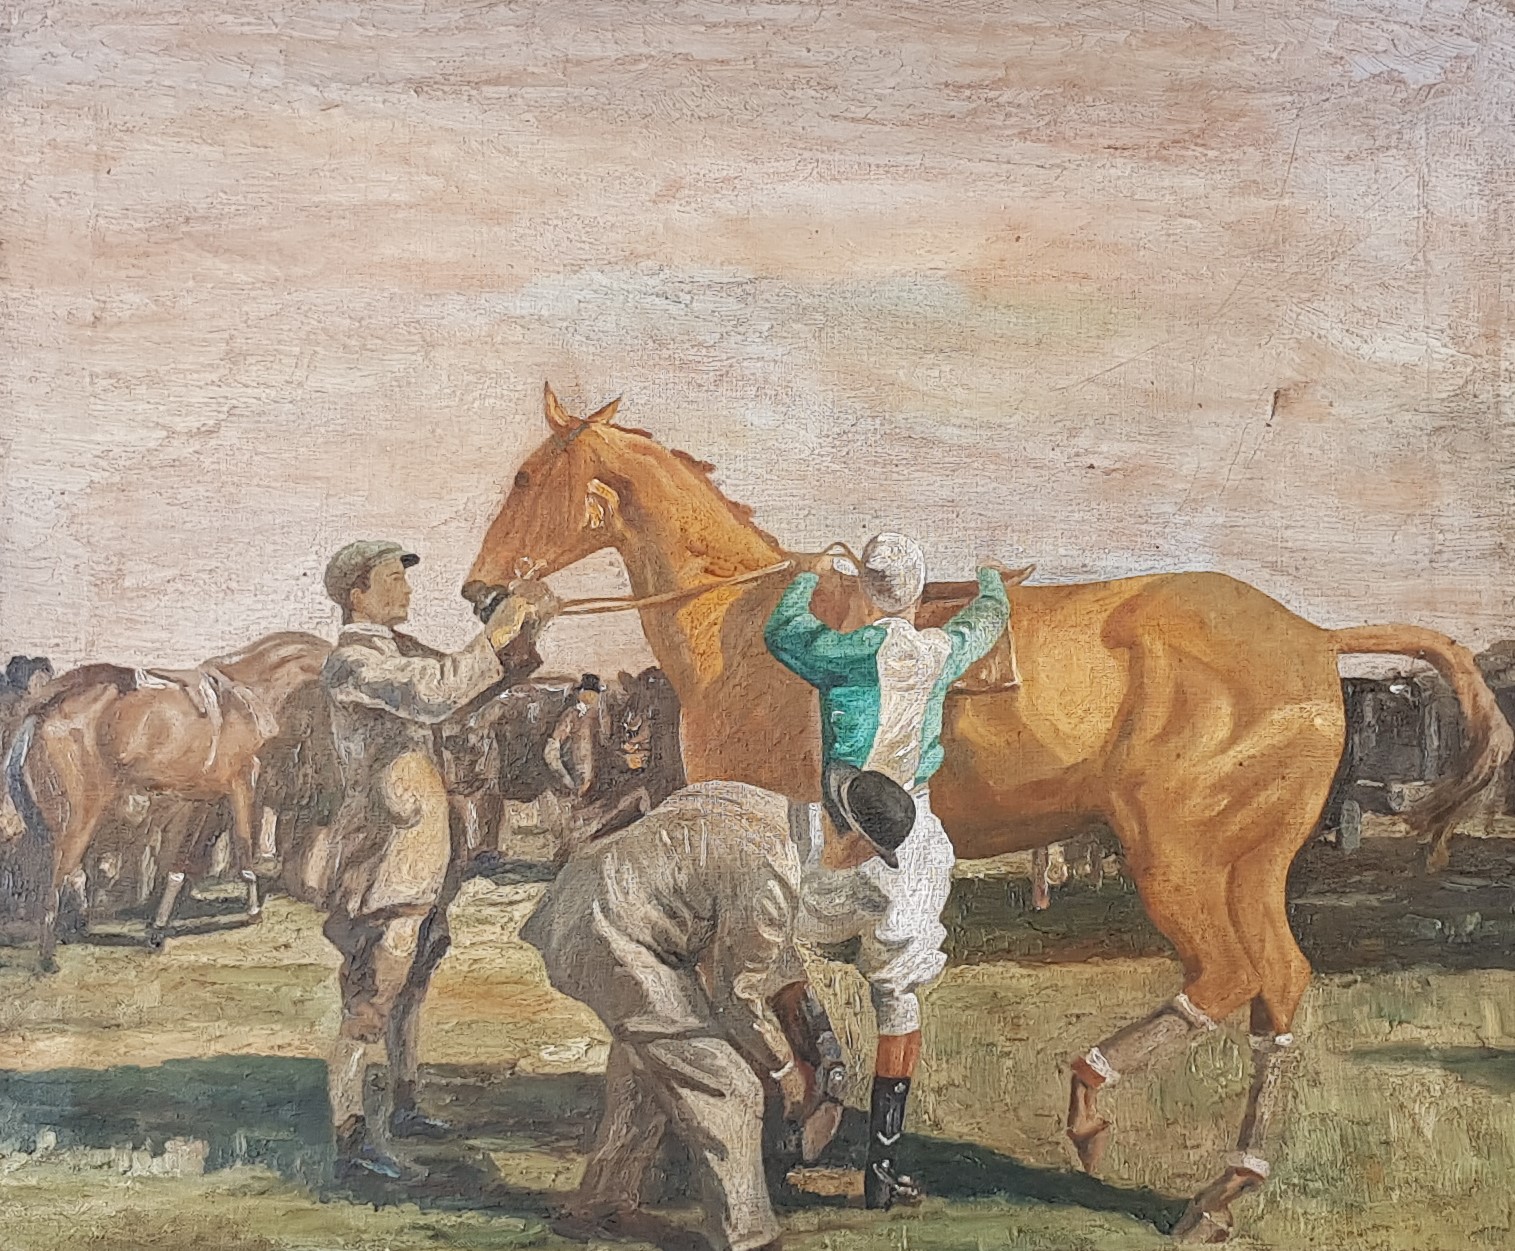 Marjorie May Macbeth-Raeburn - OIL ON CANVAS - MOUNTING UP 24'X20' - After Alfred Munnings